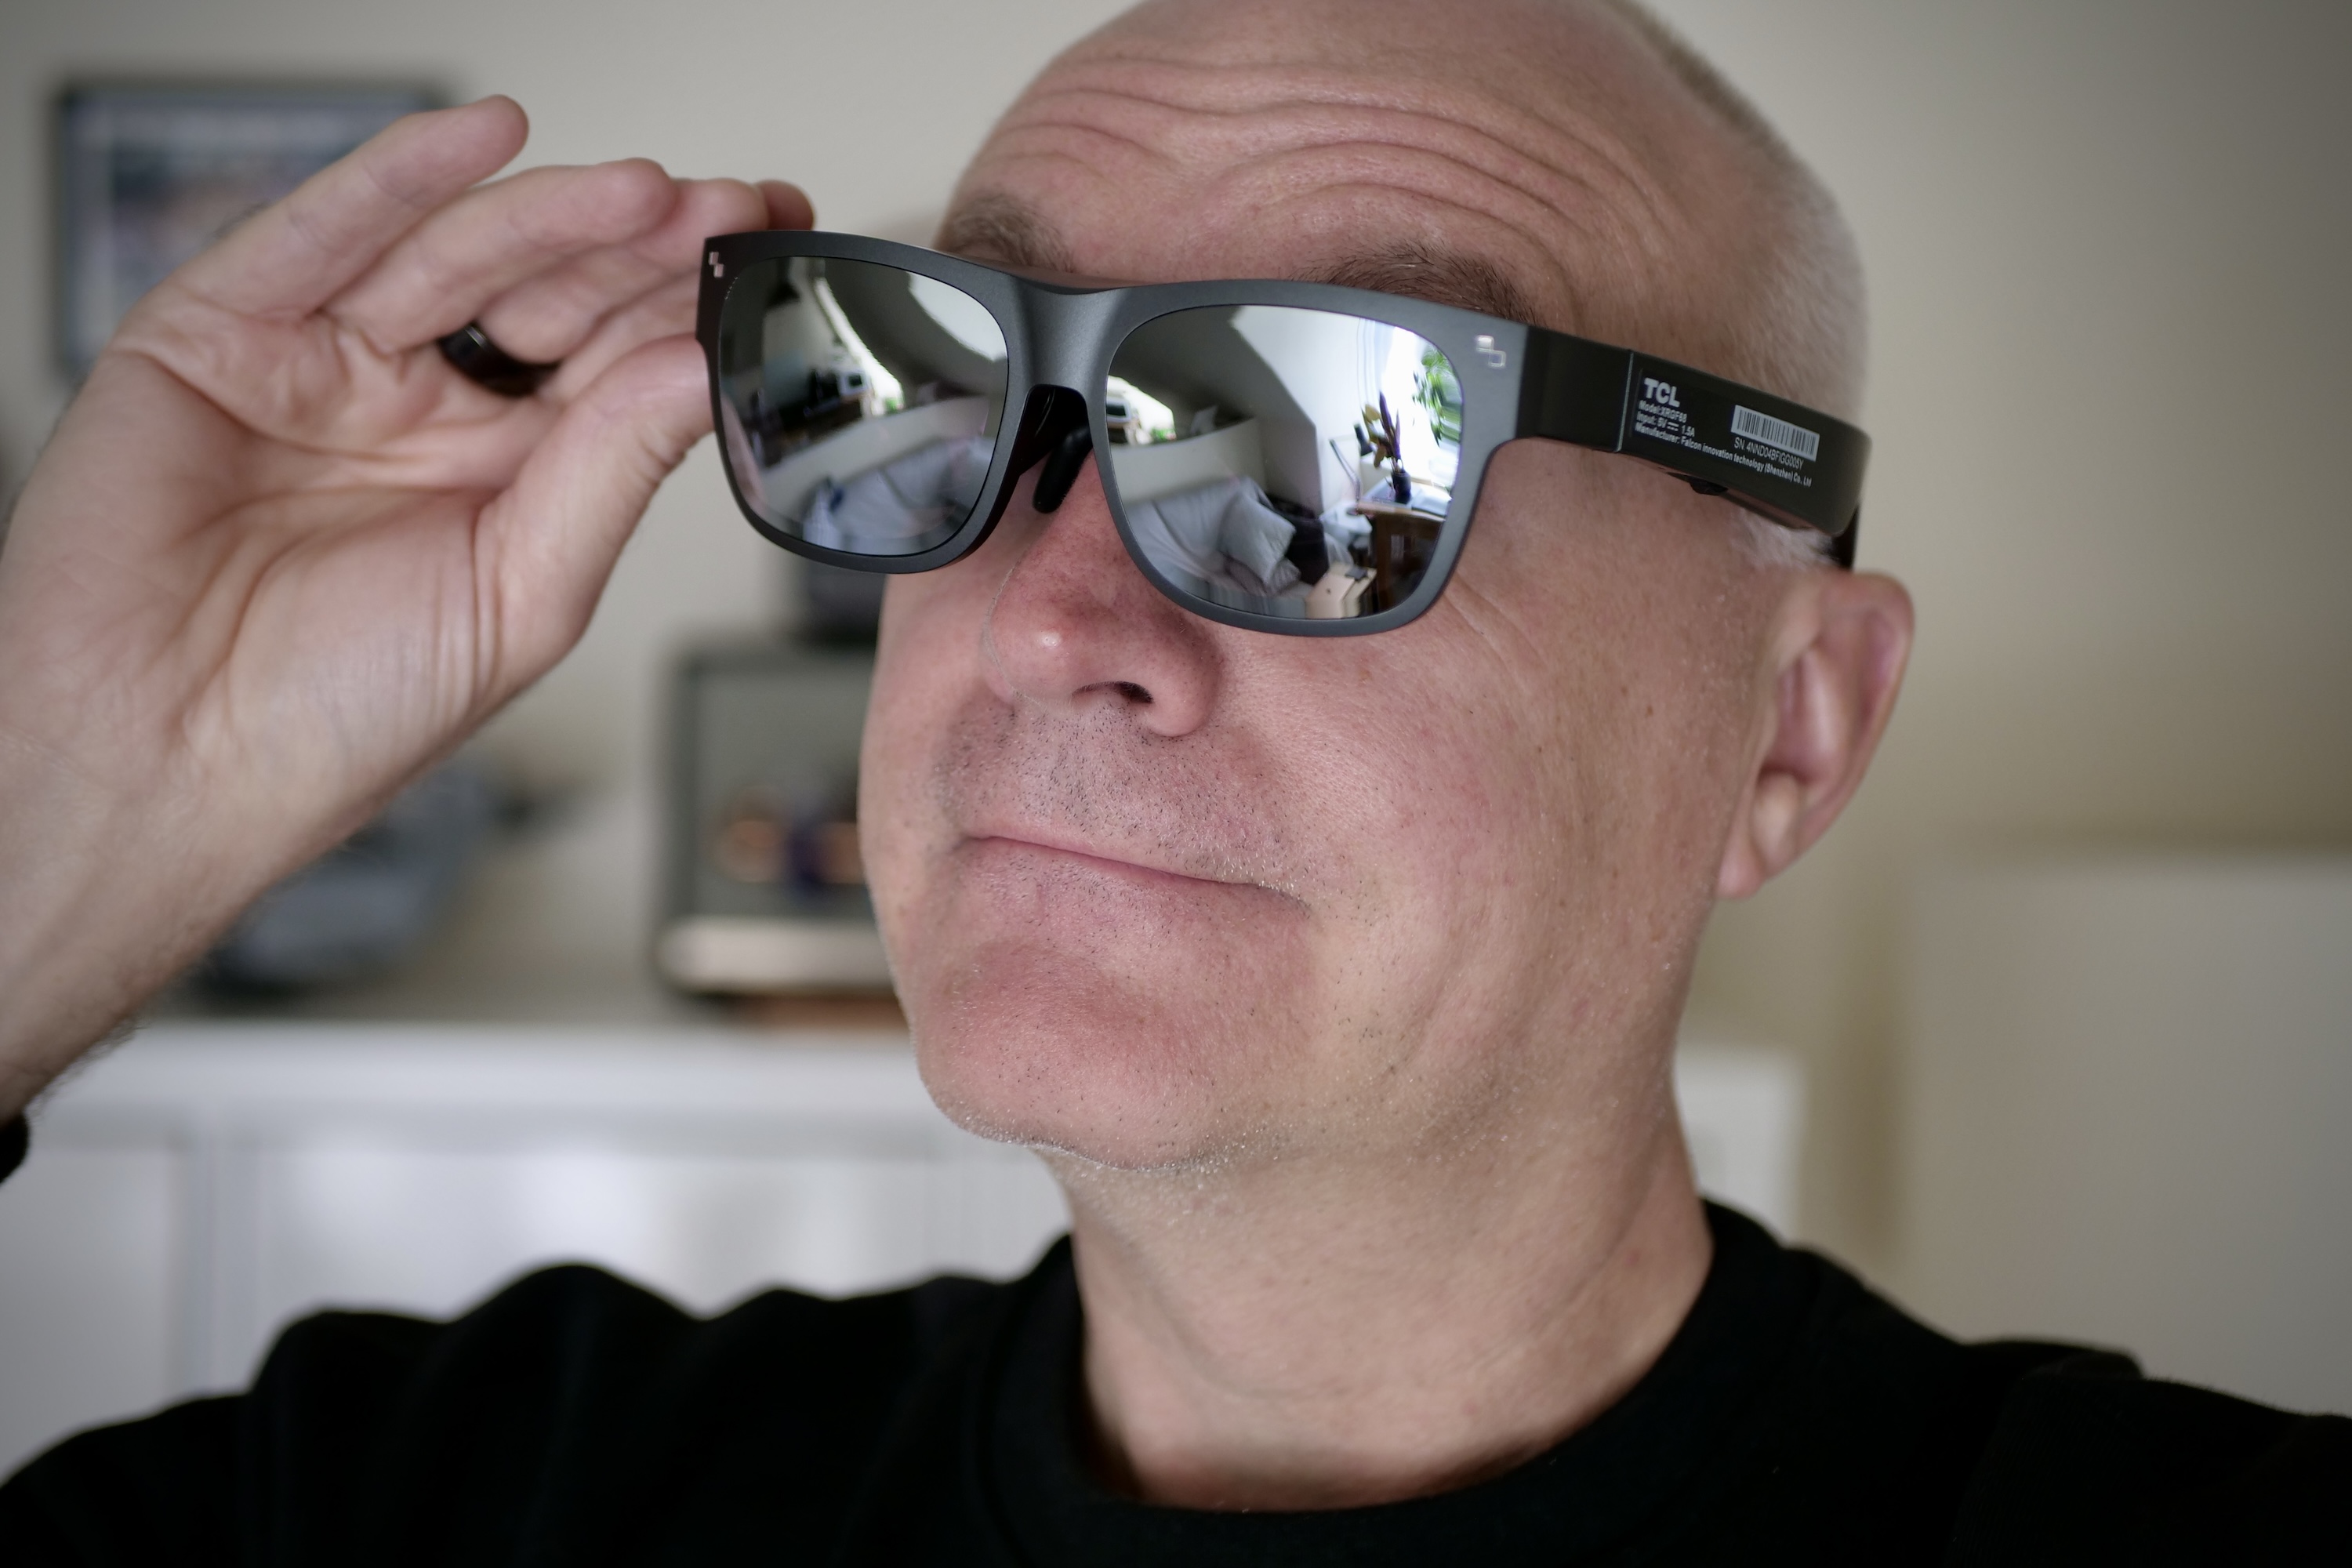 I wore smart glasses that made me excited for the future | Digital